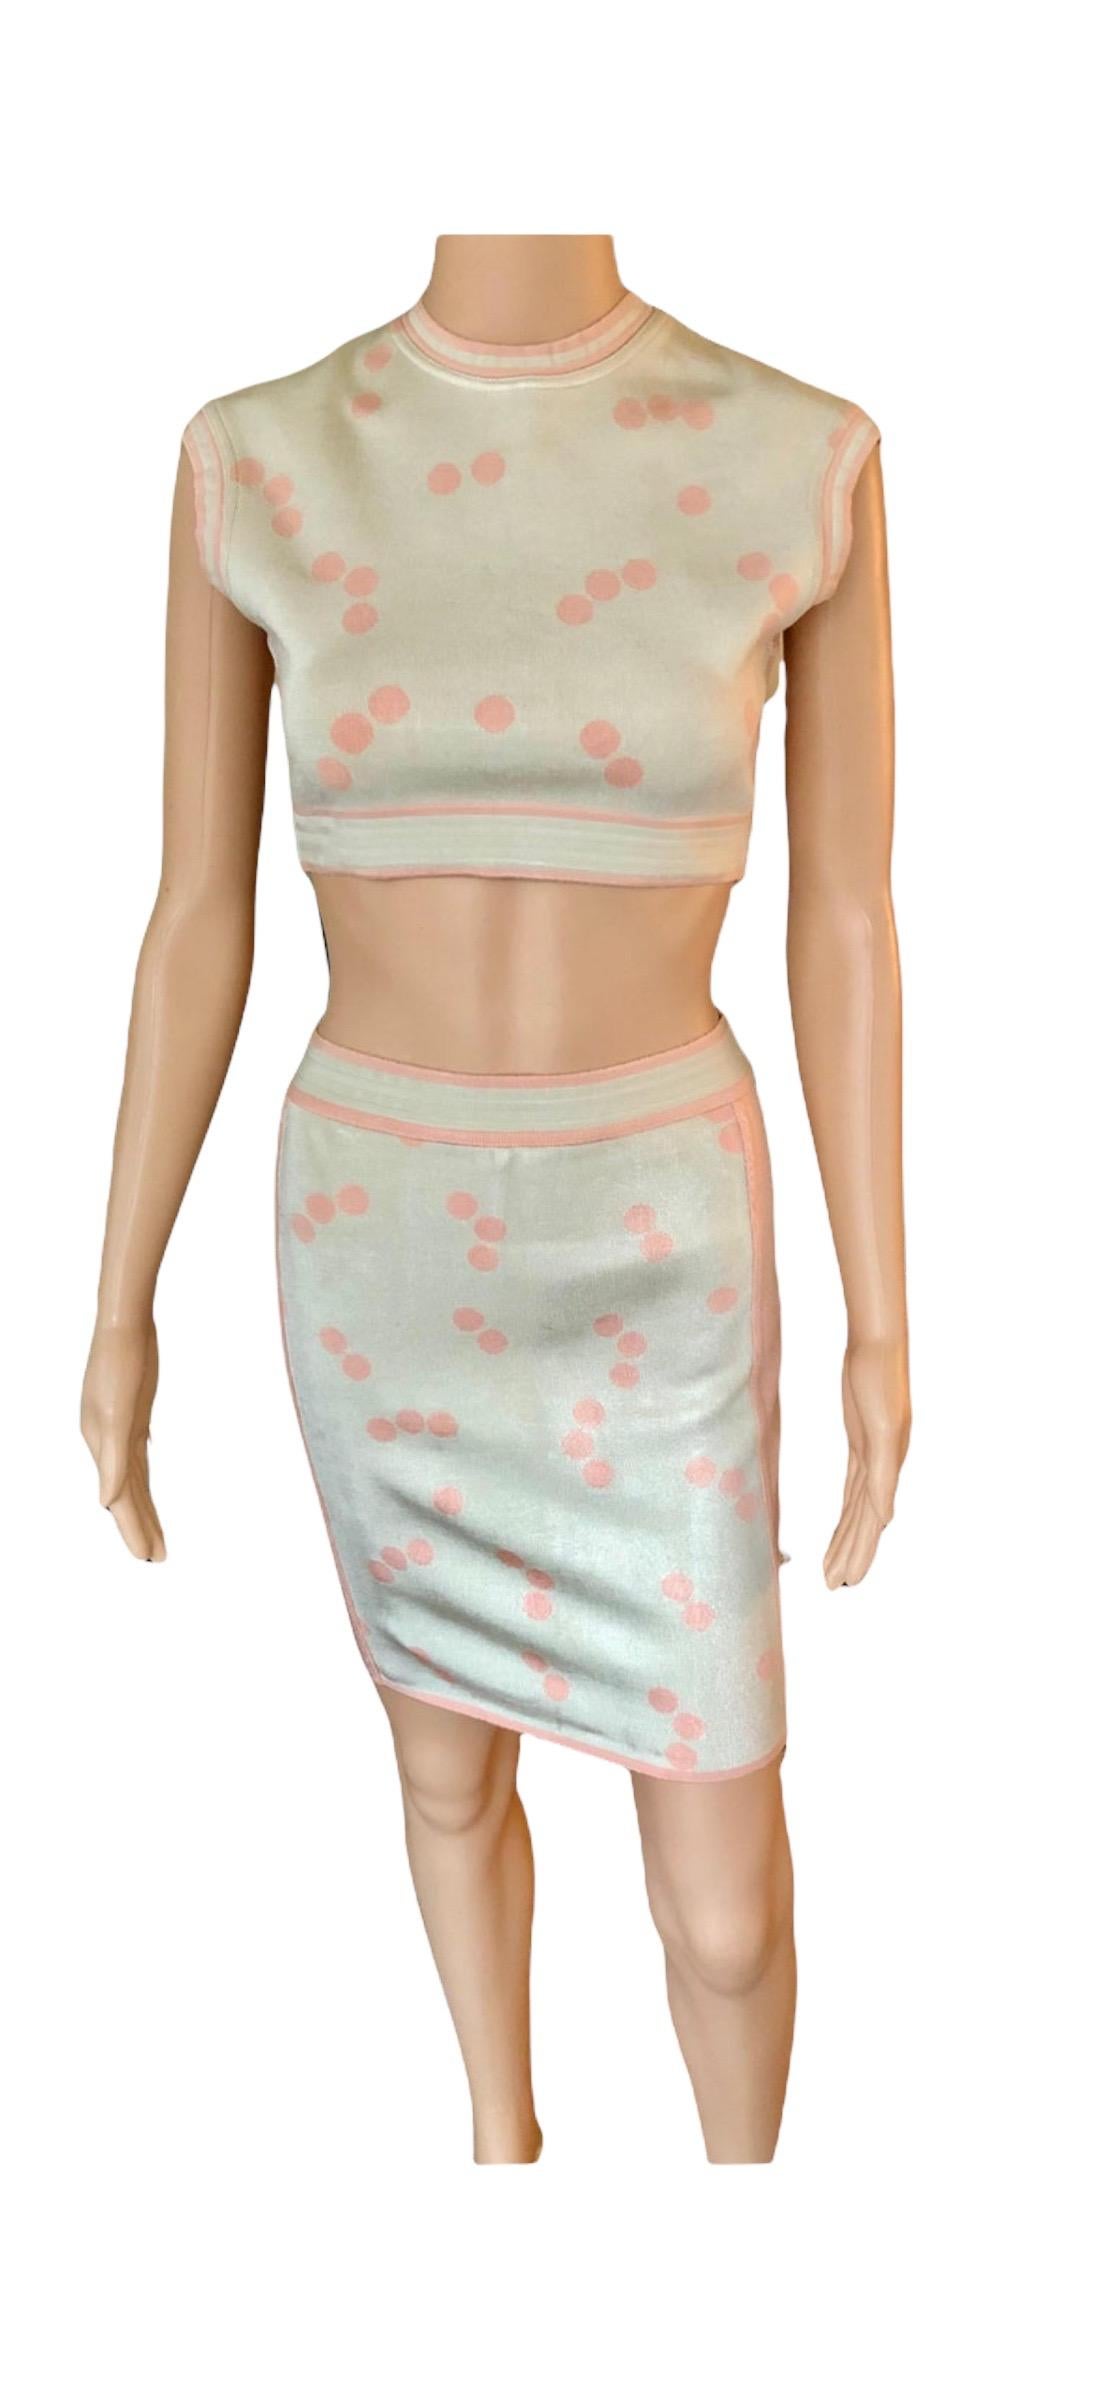 Azzedine Alaia S/S 1991 Vintage Skirt and Crop Top 2 Piece Set  For Sale 6